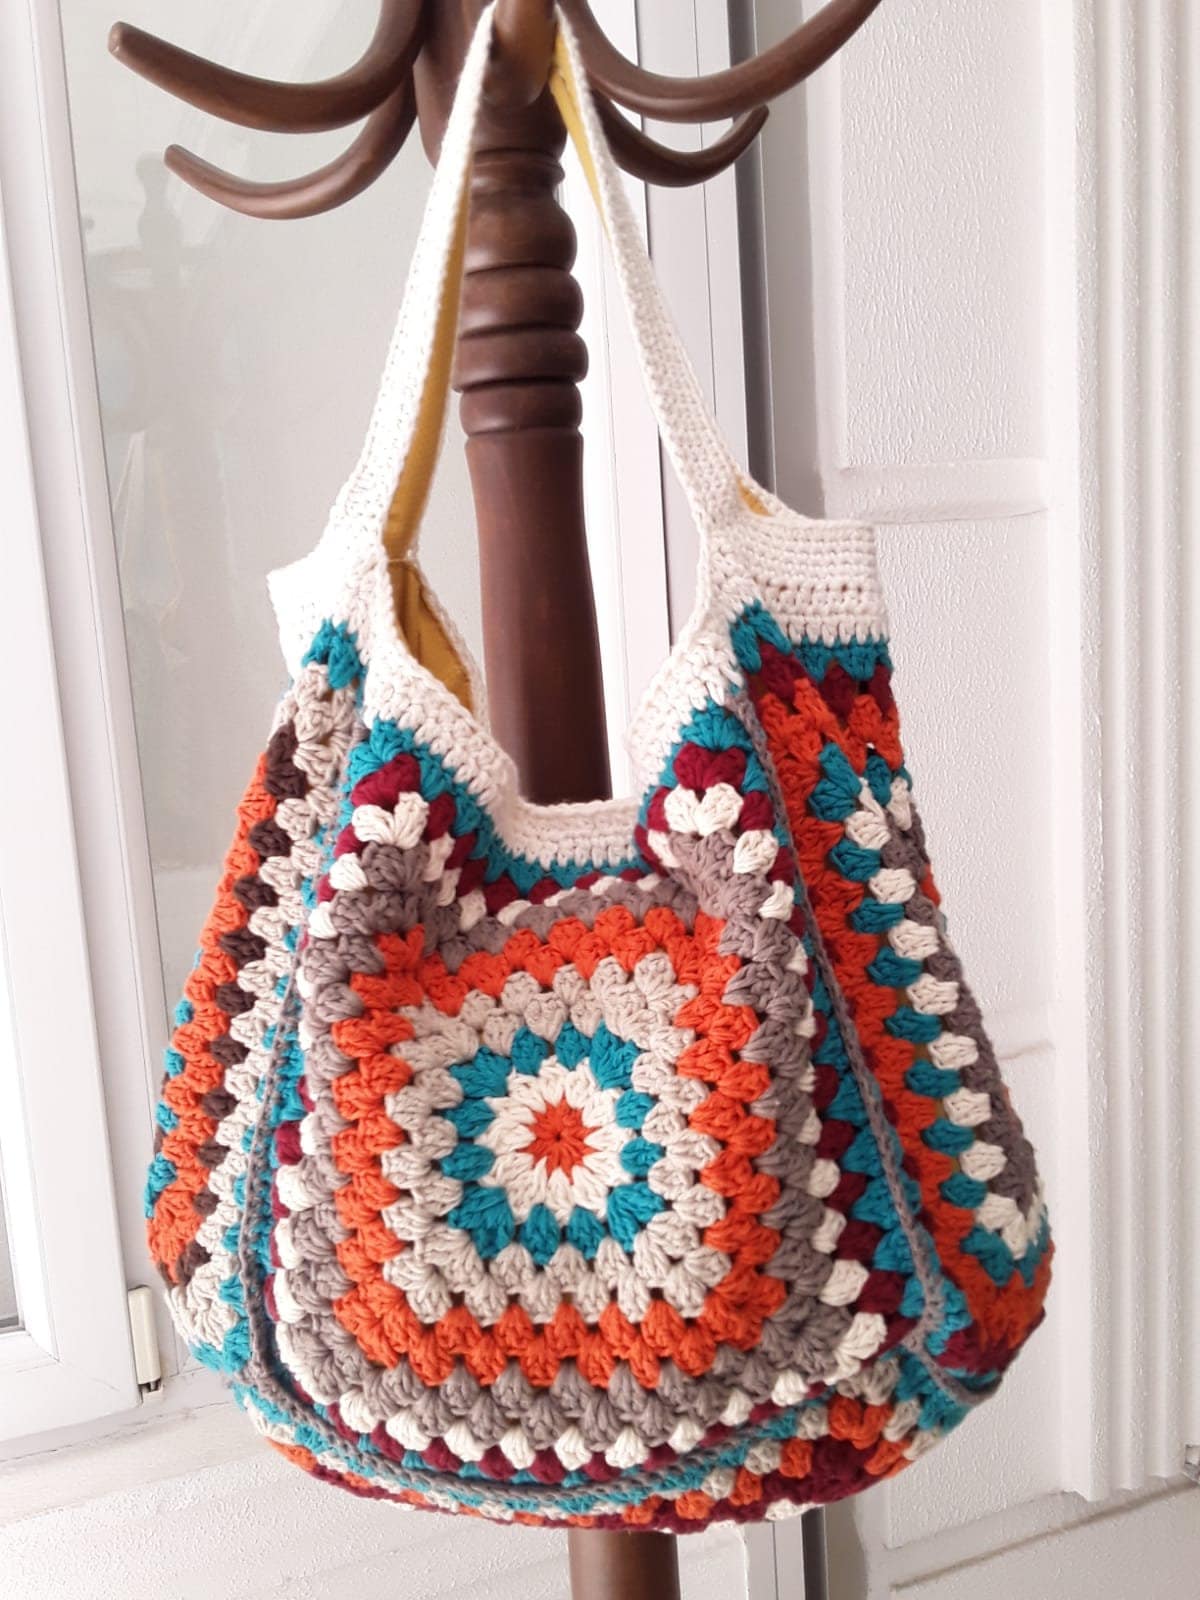 Colorful Crochet Granny Square Shoulder Bag for the Beach or 